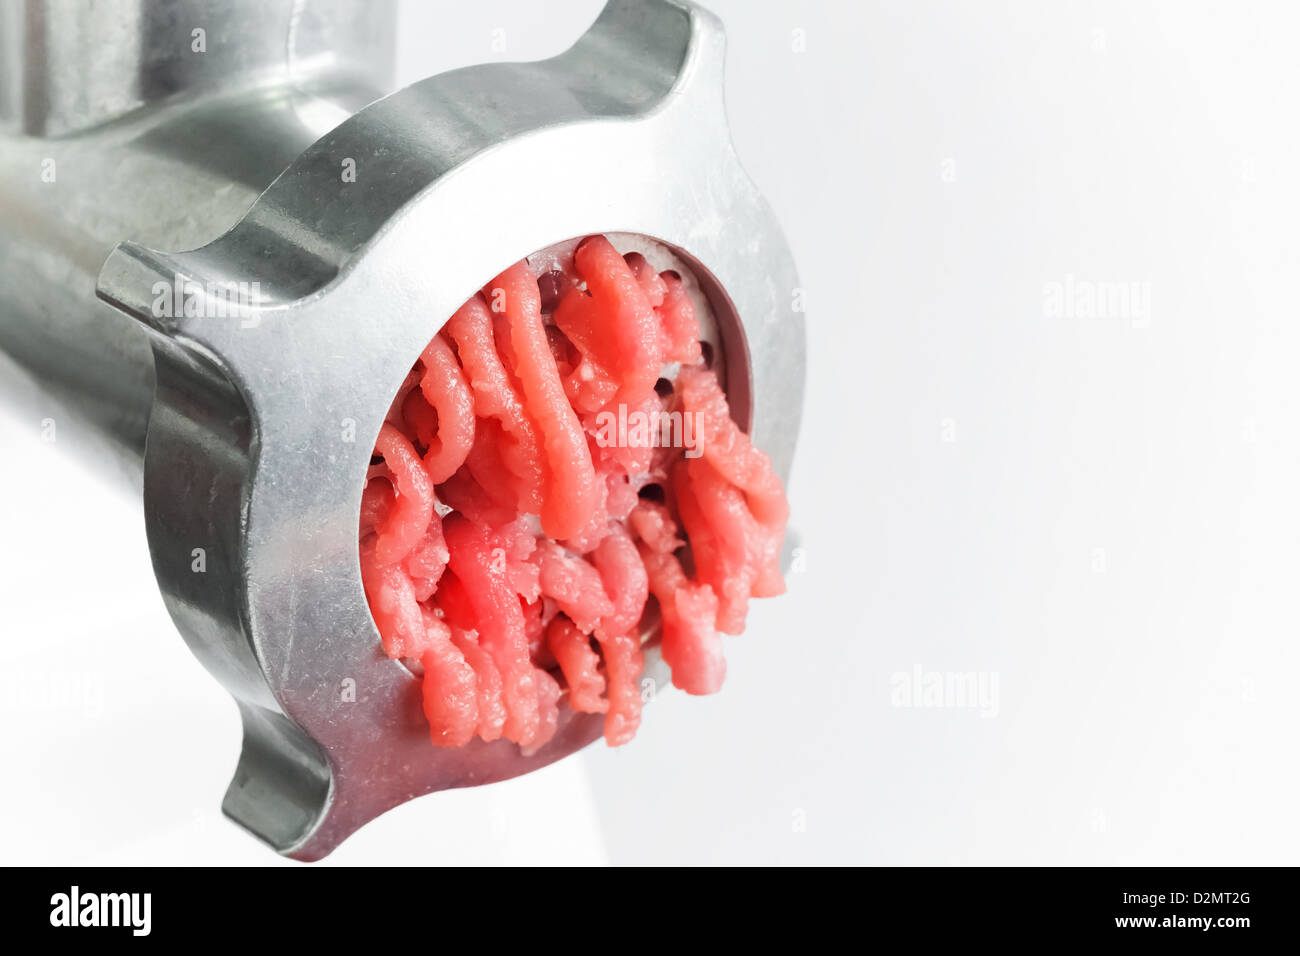 Closeup photo of mincer machine with chopped meat Stock Photo